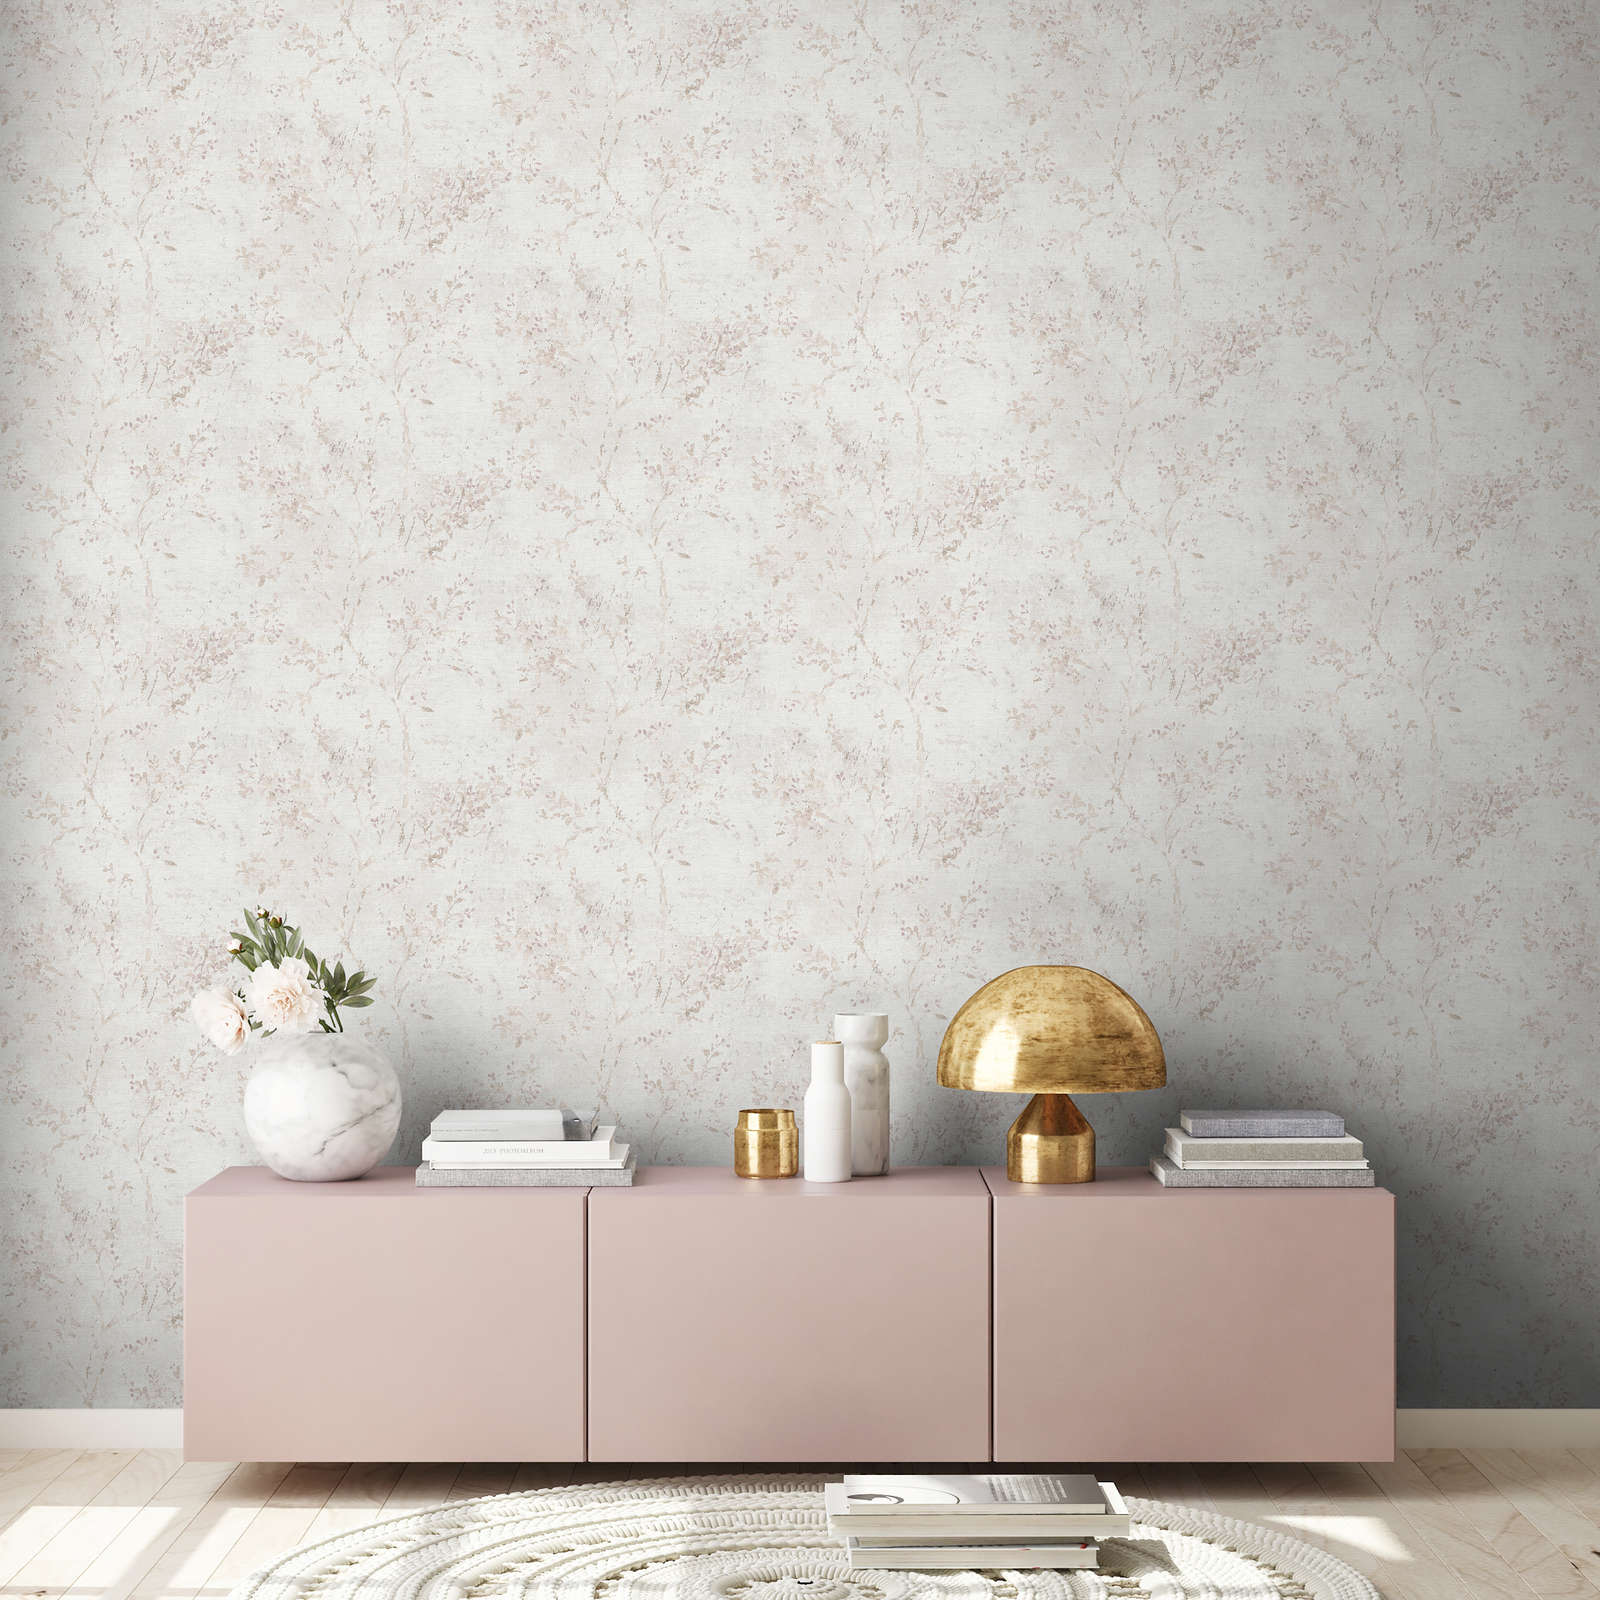             Non-woven wallpaper with a playful floral pattern - grey, beige, purple
        